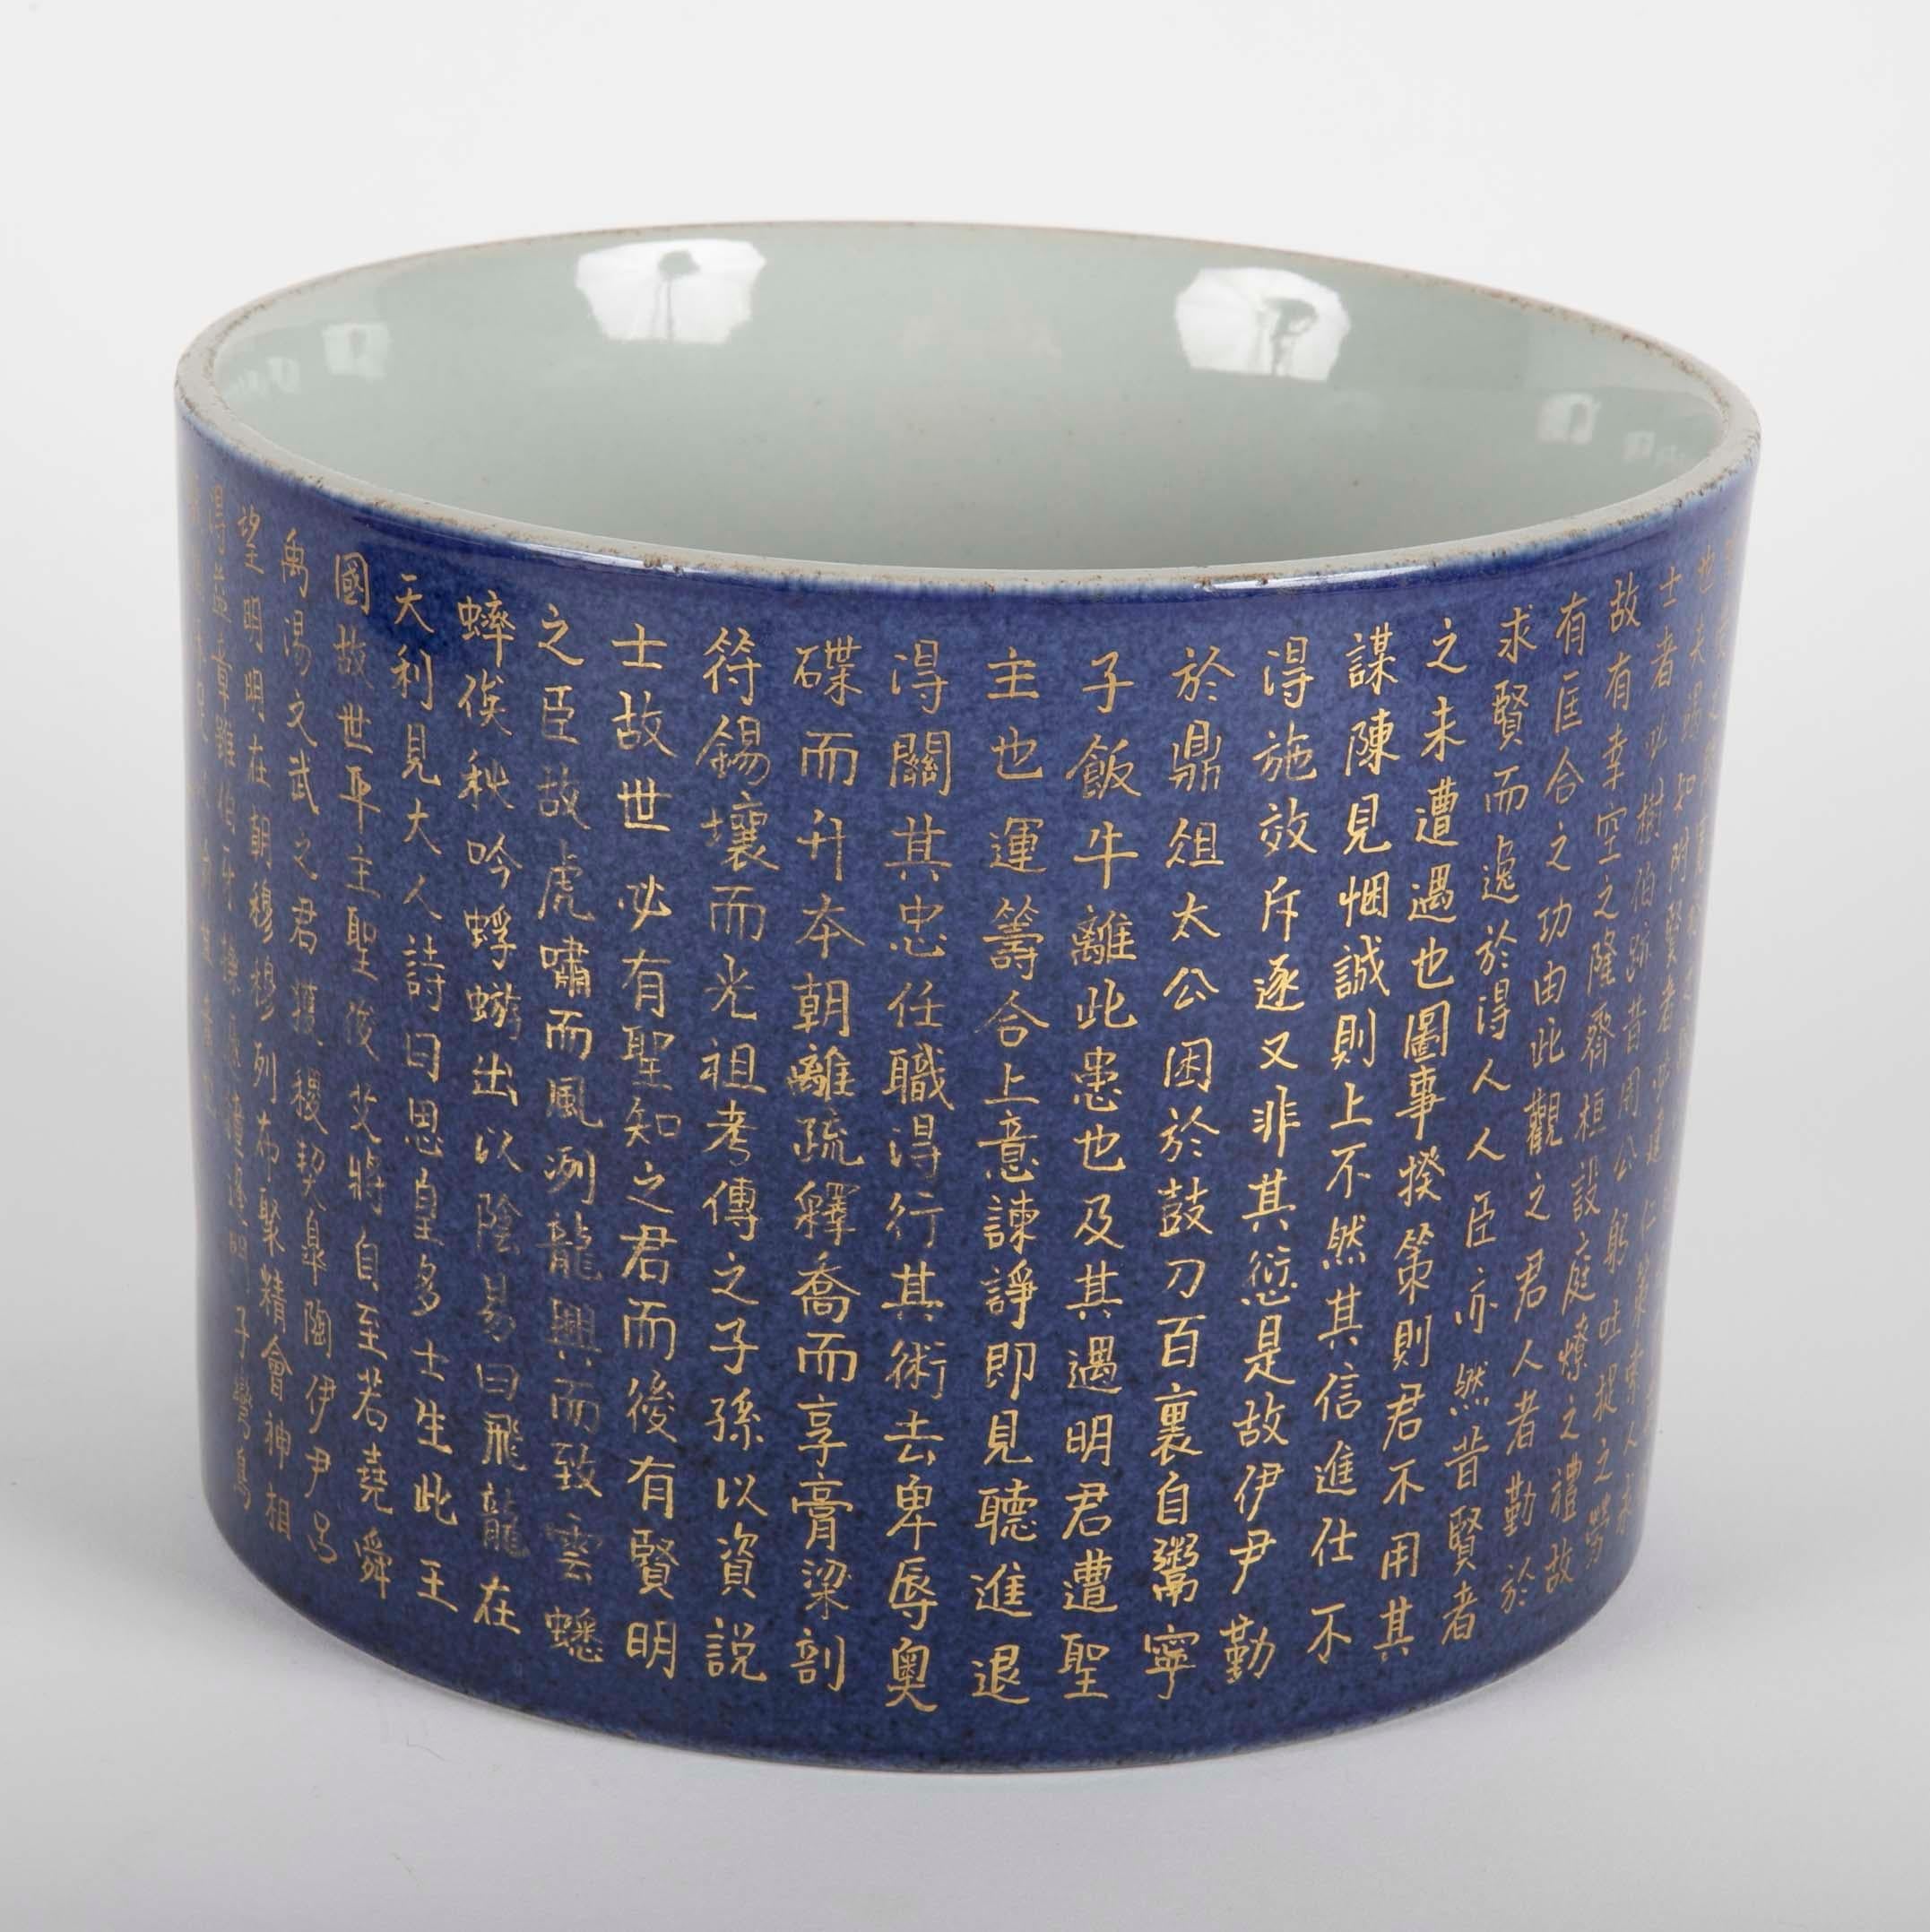 Kangxi style deep blue brush pot decorated with lines of calligraphy in gold. 20th century.